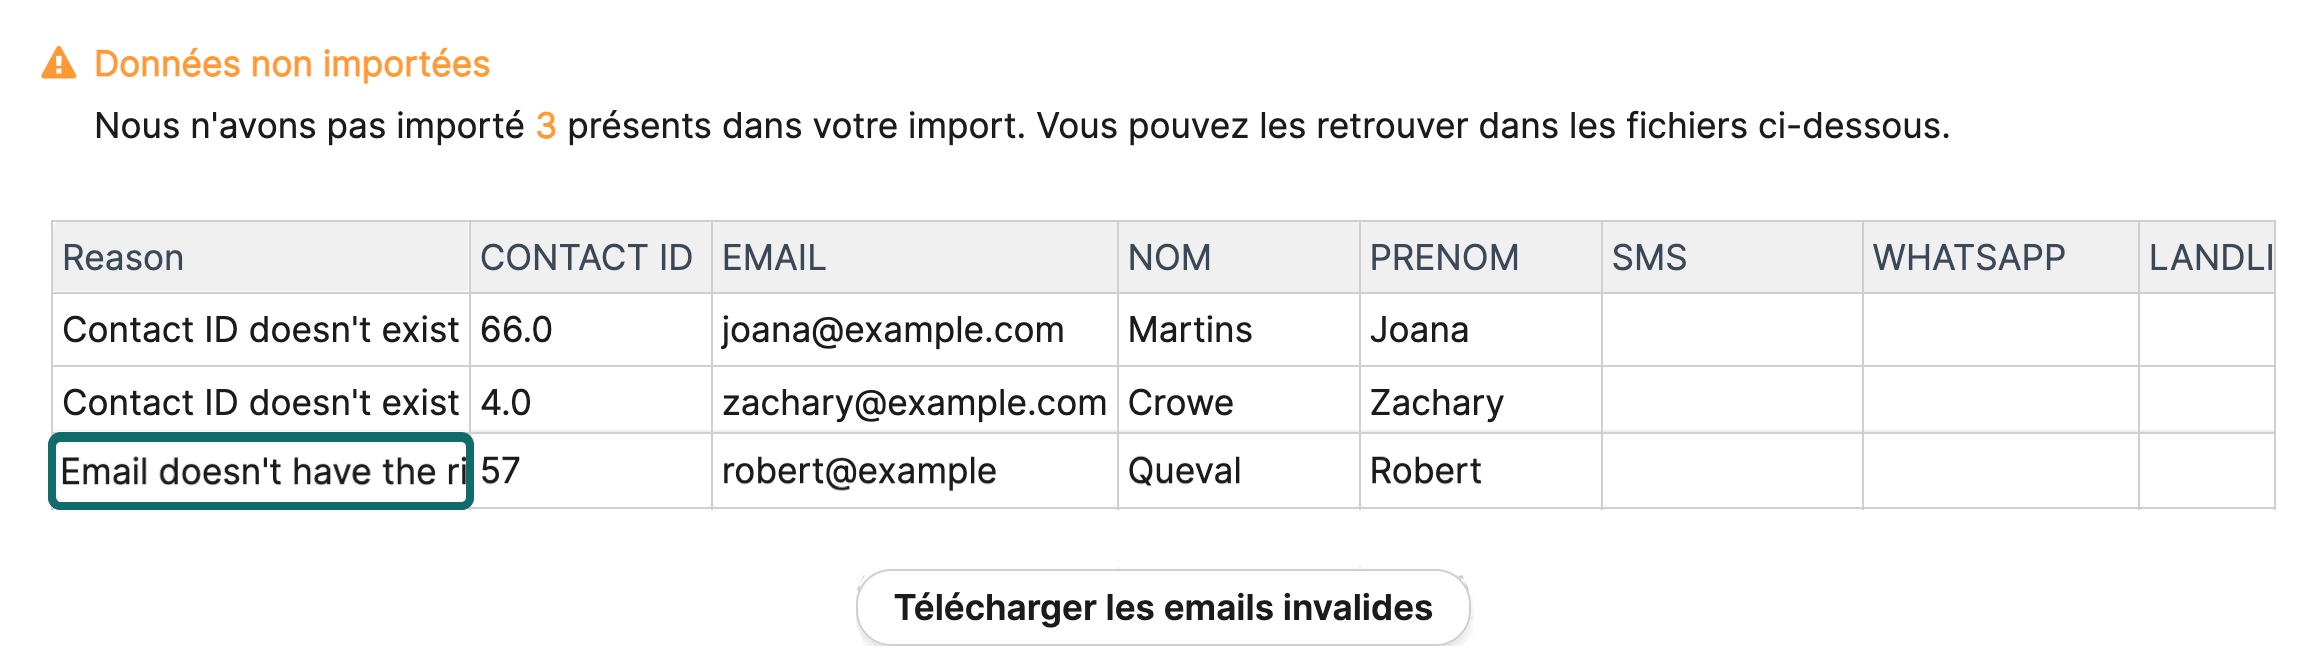 contacts_invalid_email_report_fr.jpg